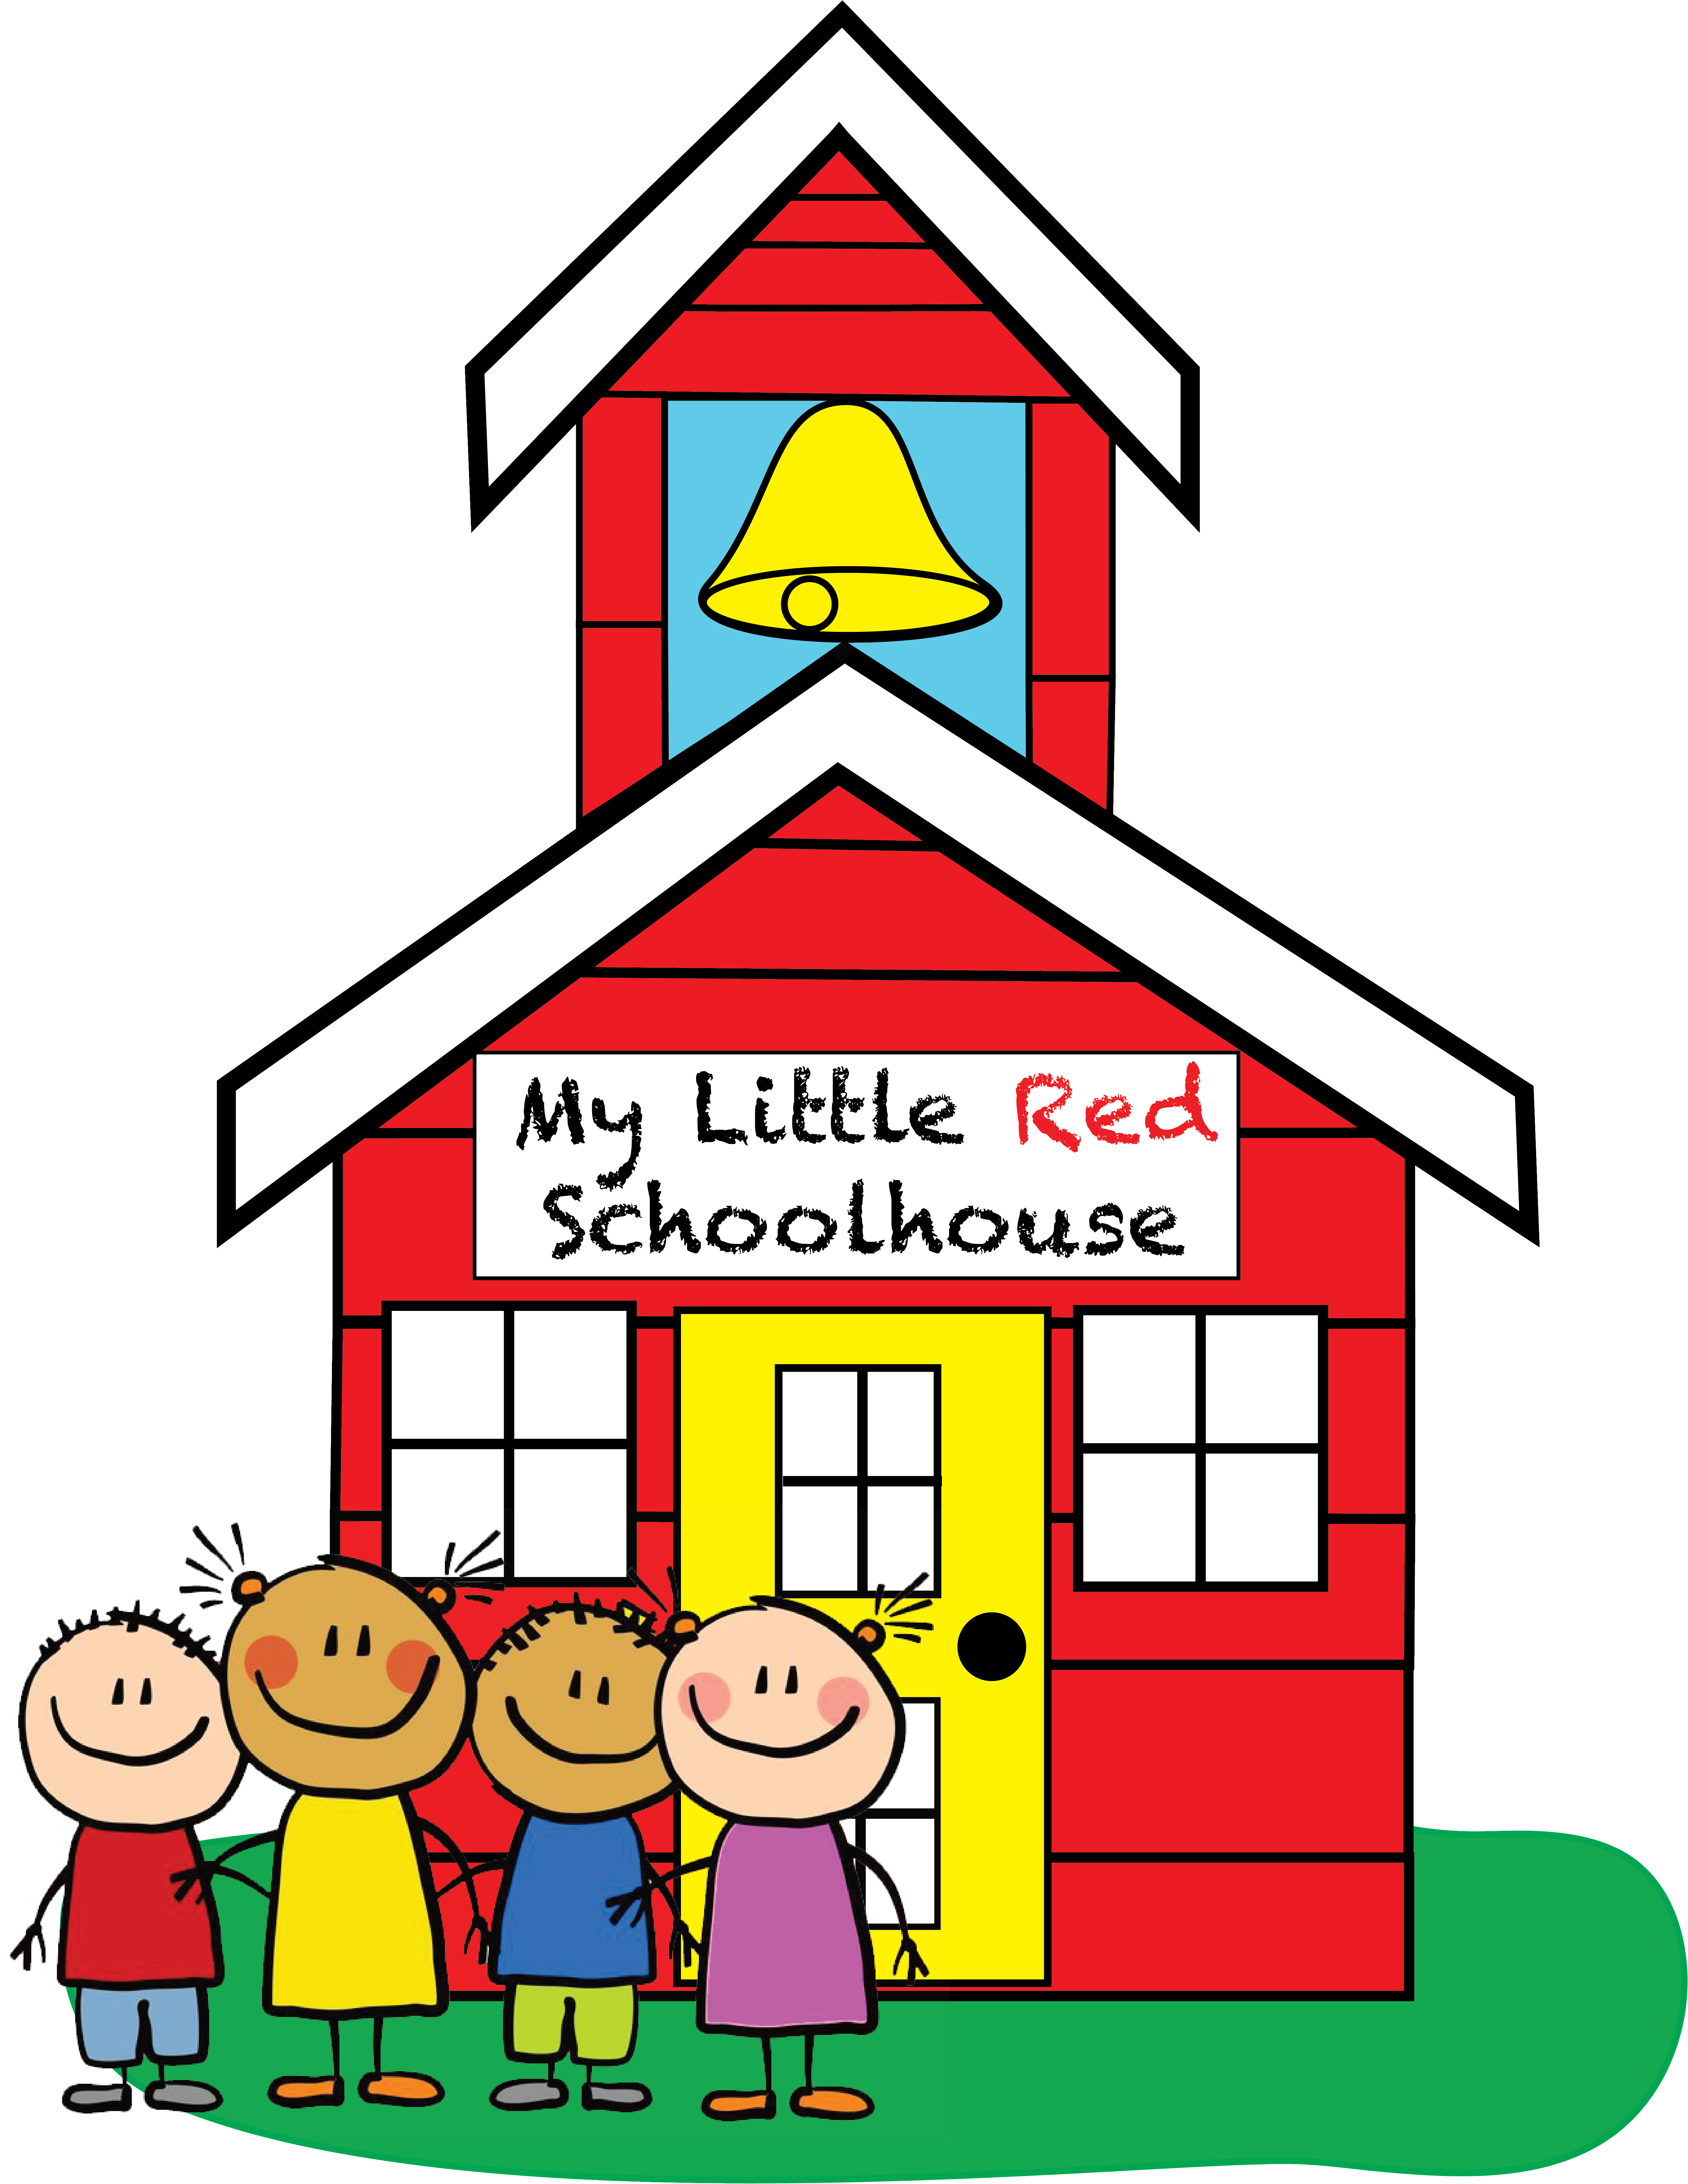 Schoolhouse clipart little red schoolhouse, Picture 3139482